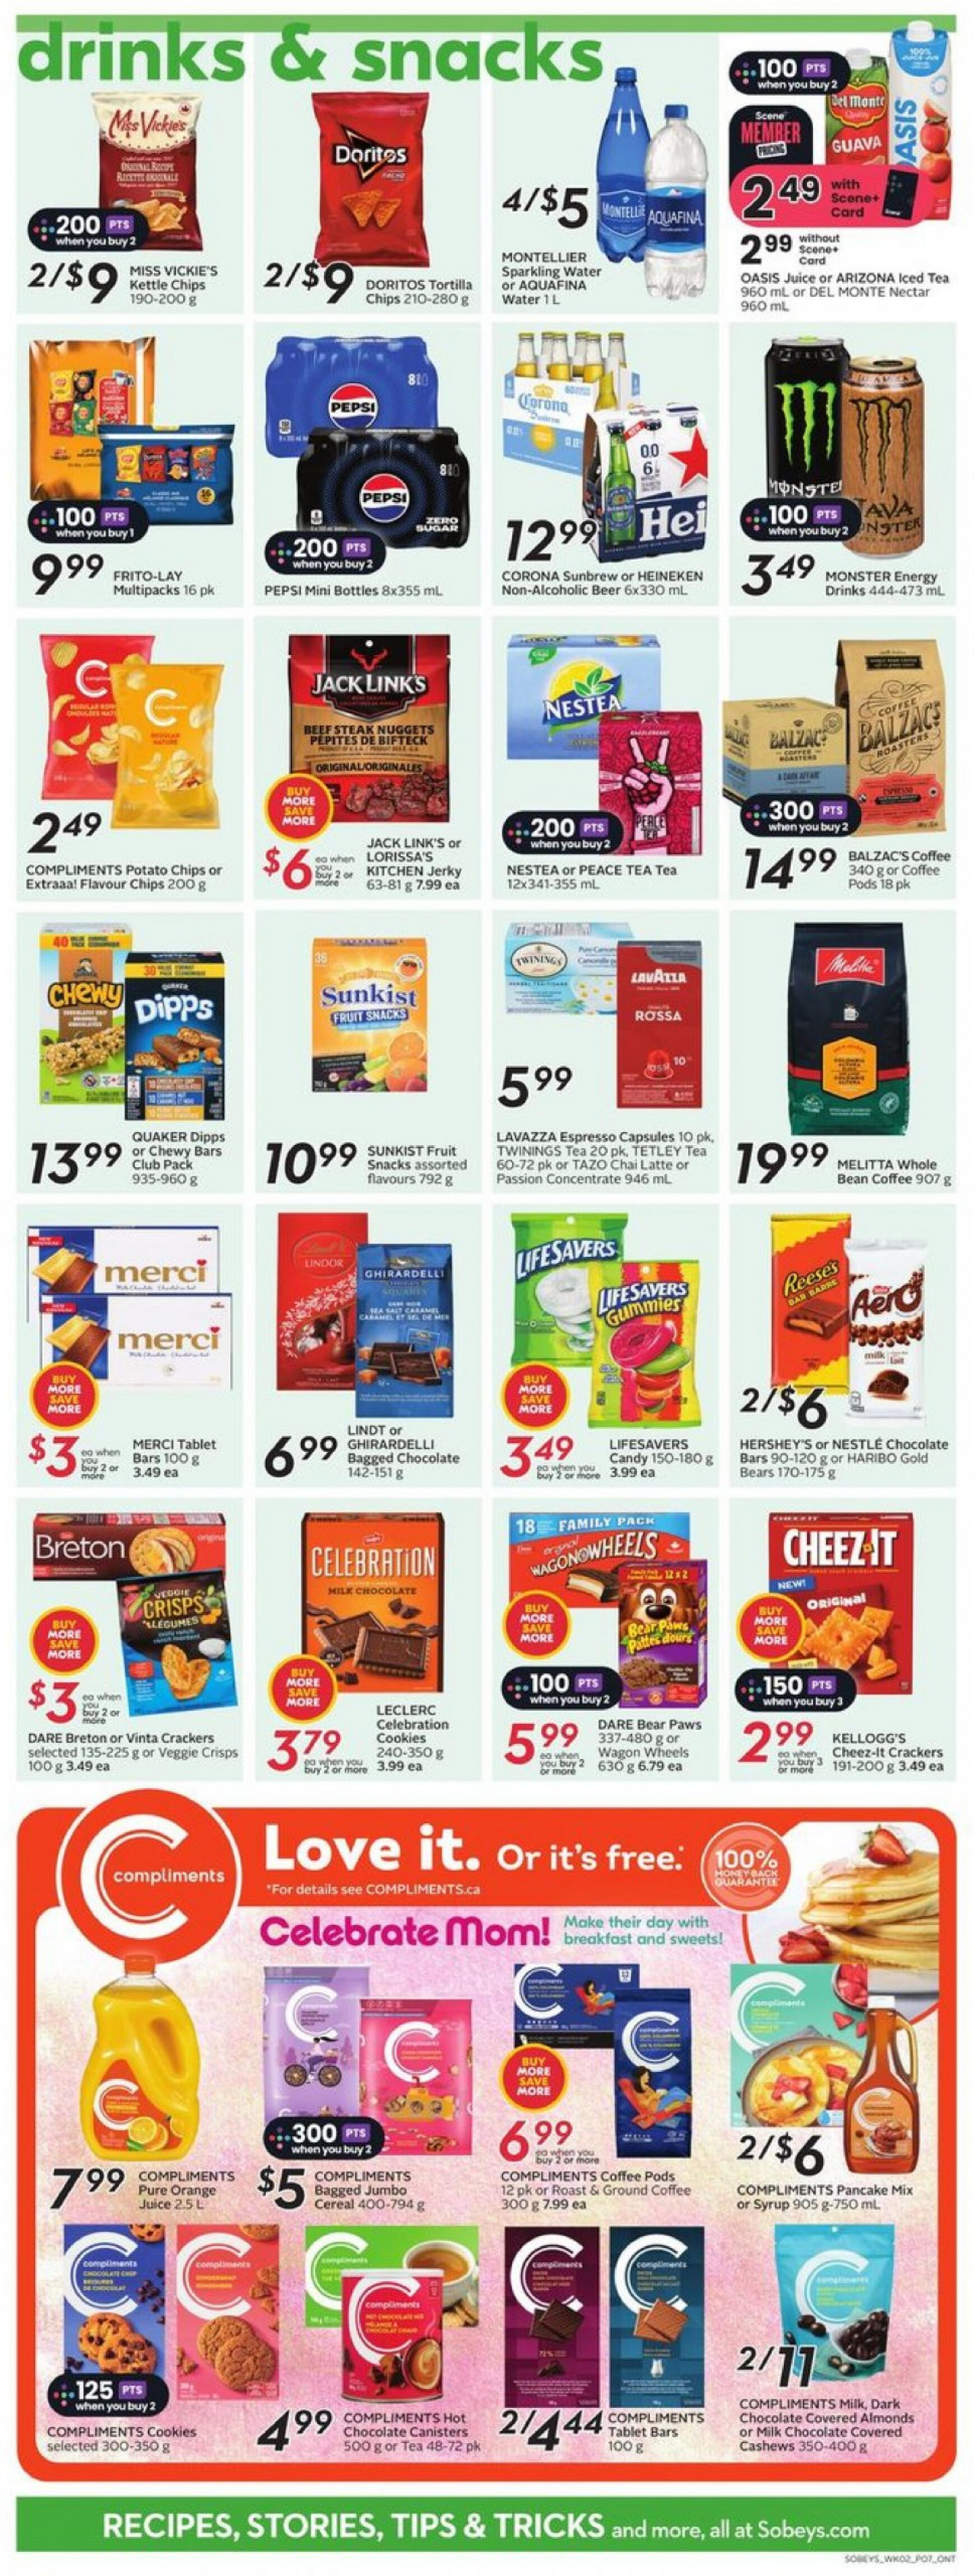 sobeys - Sobeys - Weekly Flyer - Ontario flyer current 09.05. - 15.05. - page: 13